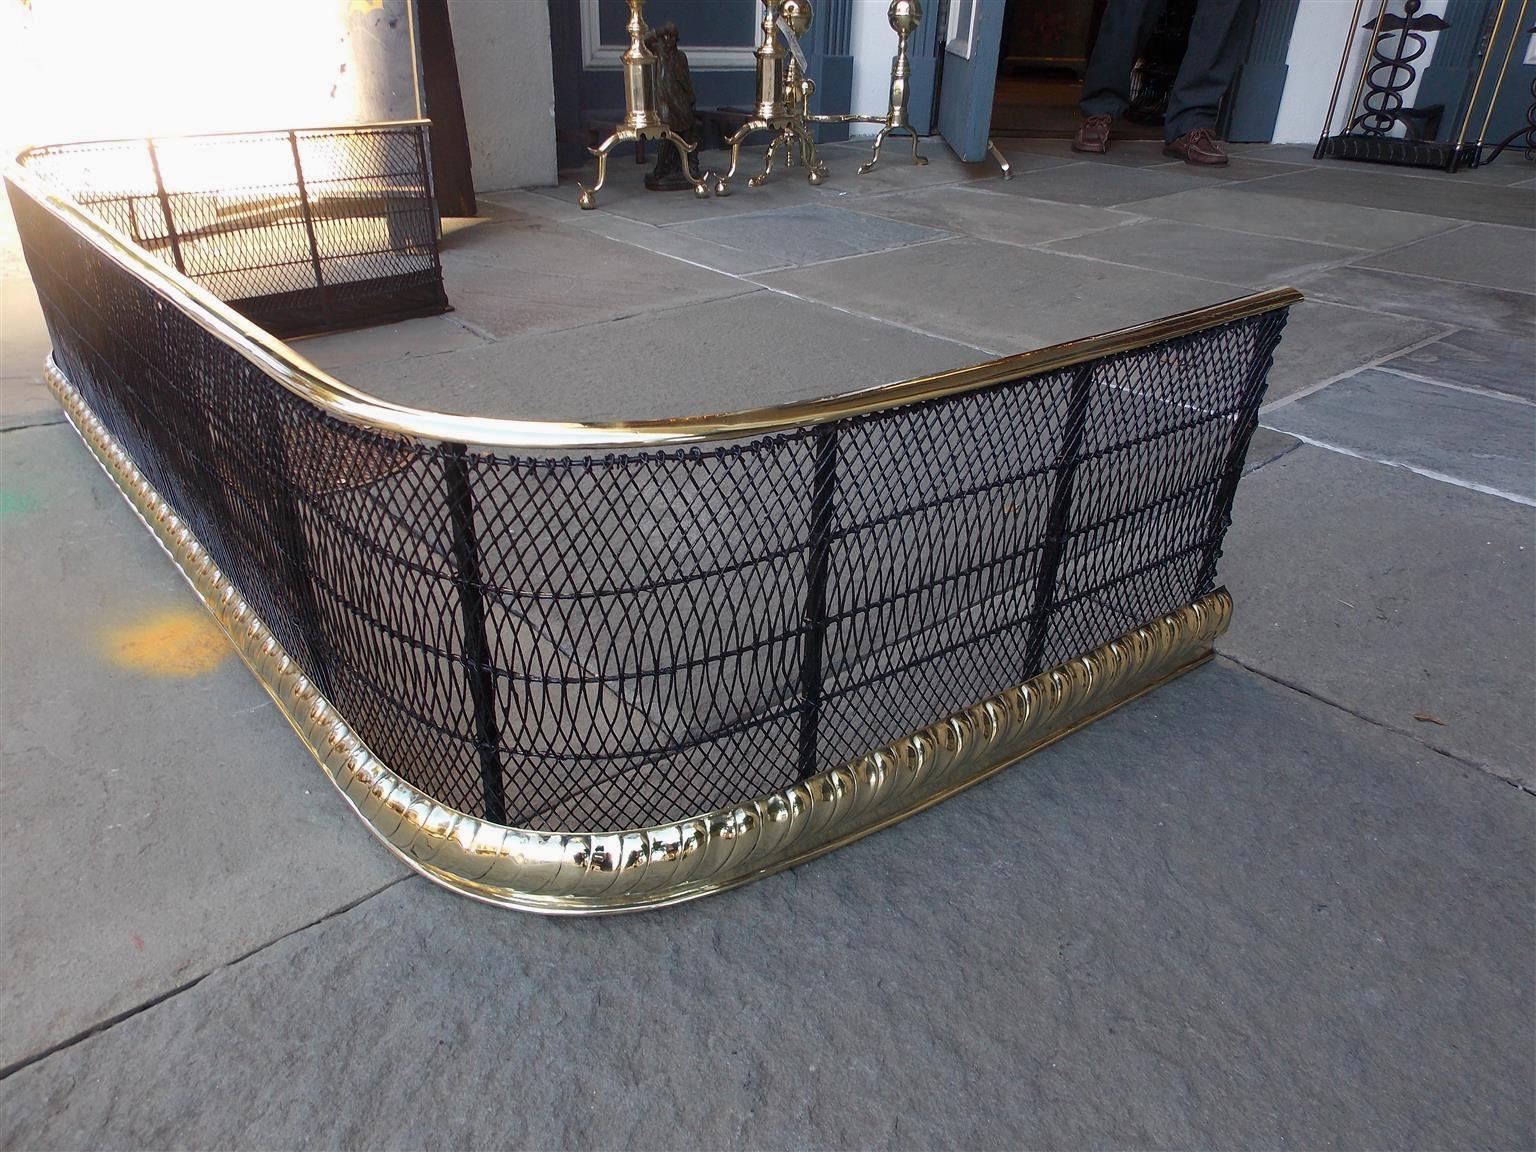 Cast American Brass Rail and Rope Artistic Wire Work Fire Place Fender, NY, C. 1800 For Sale